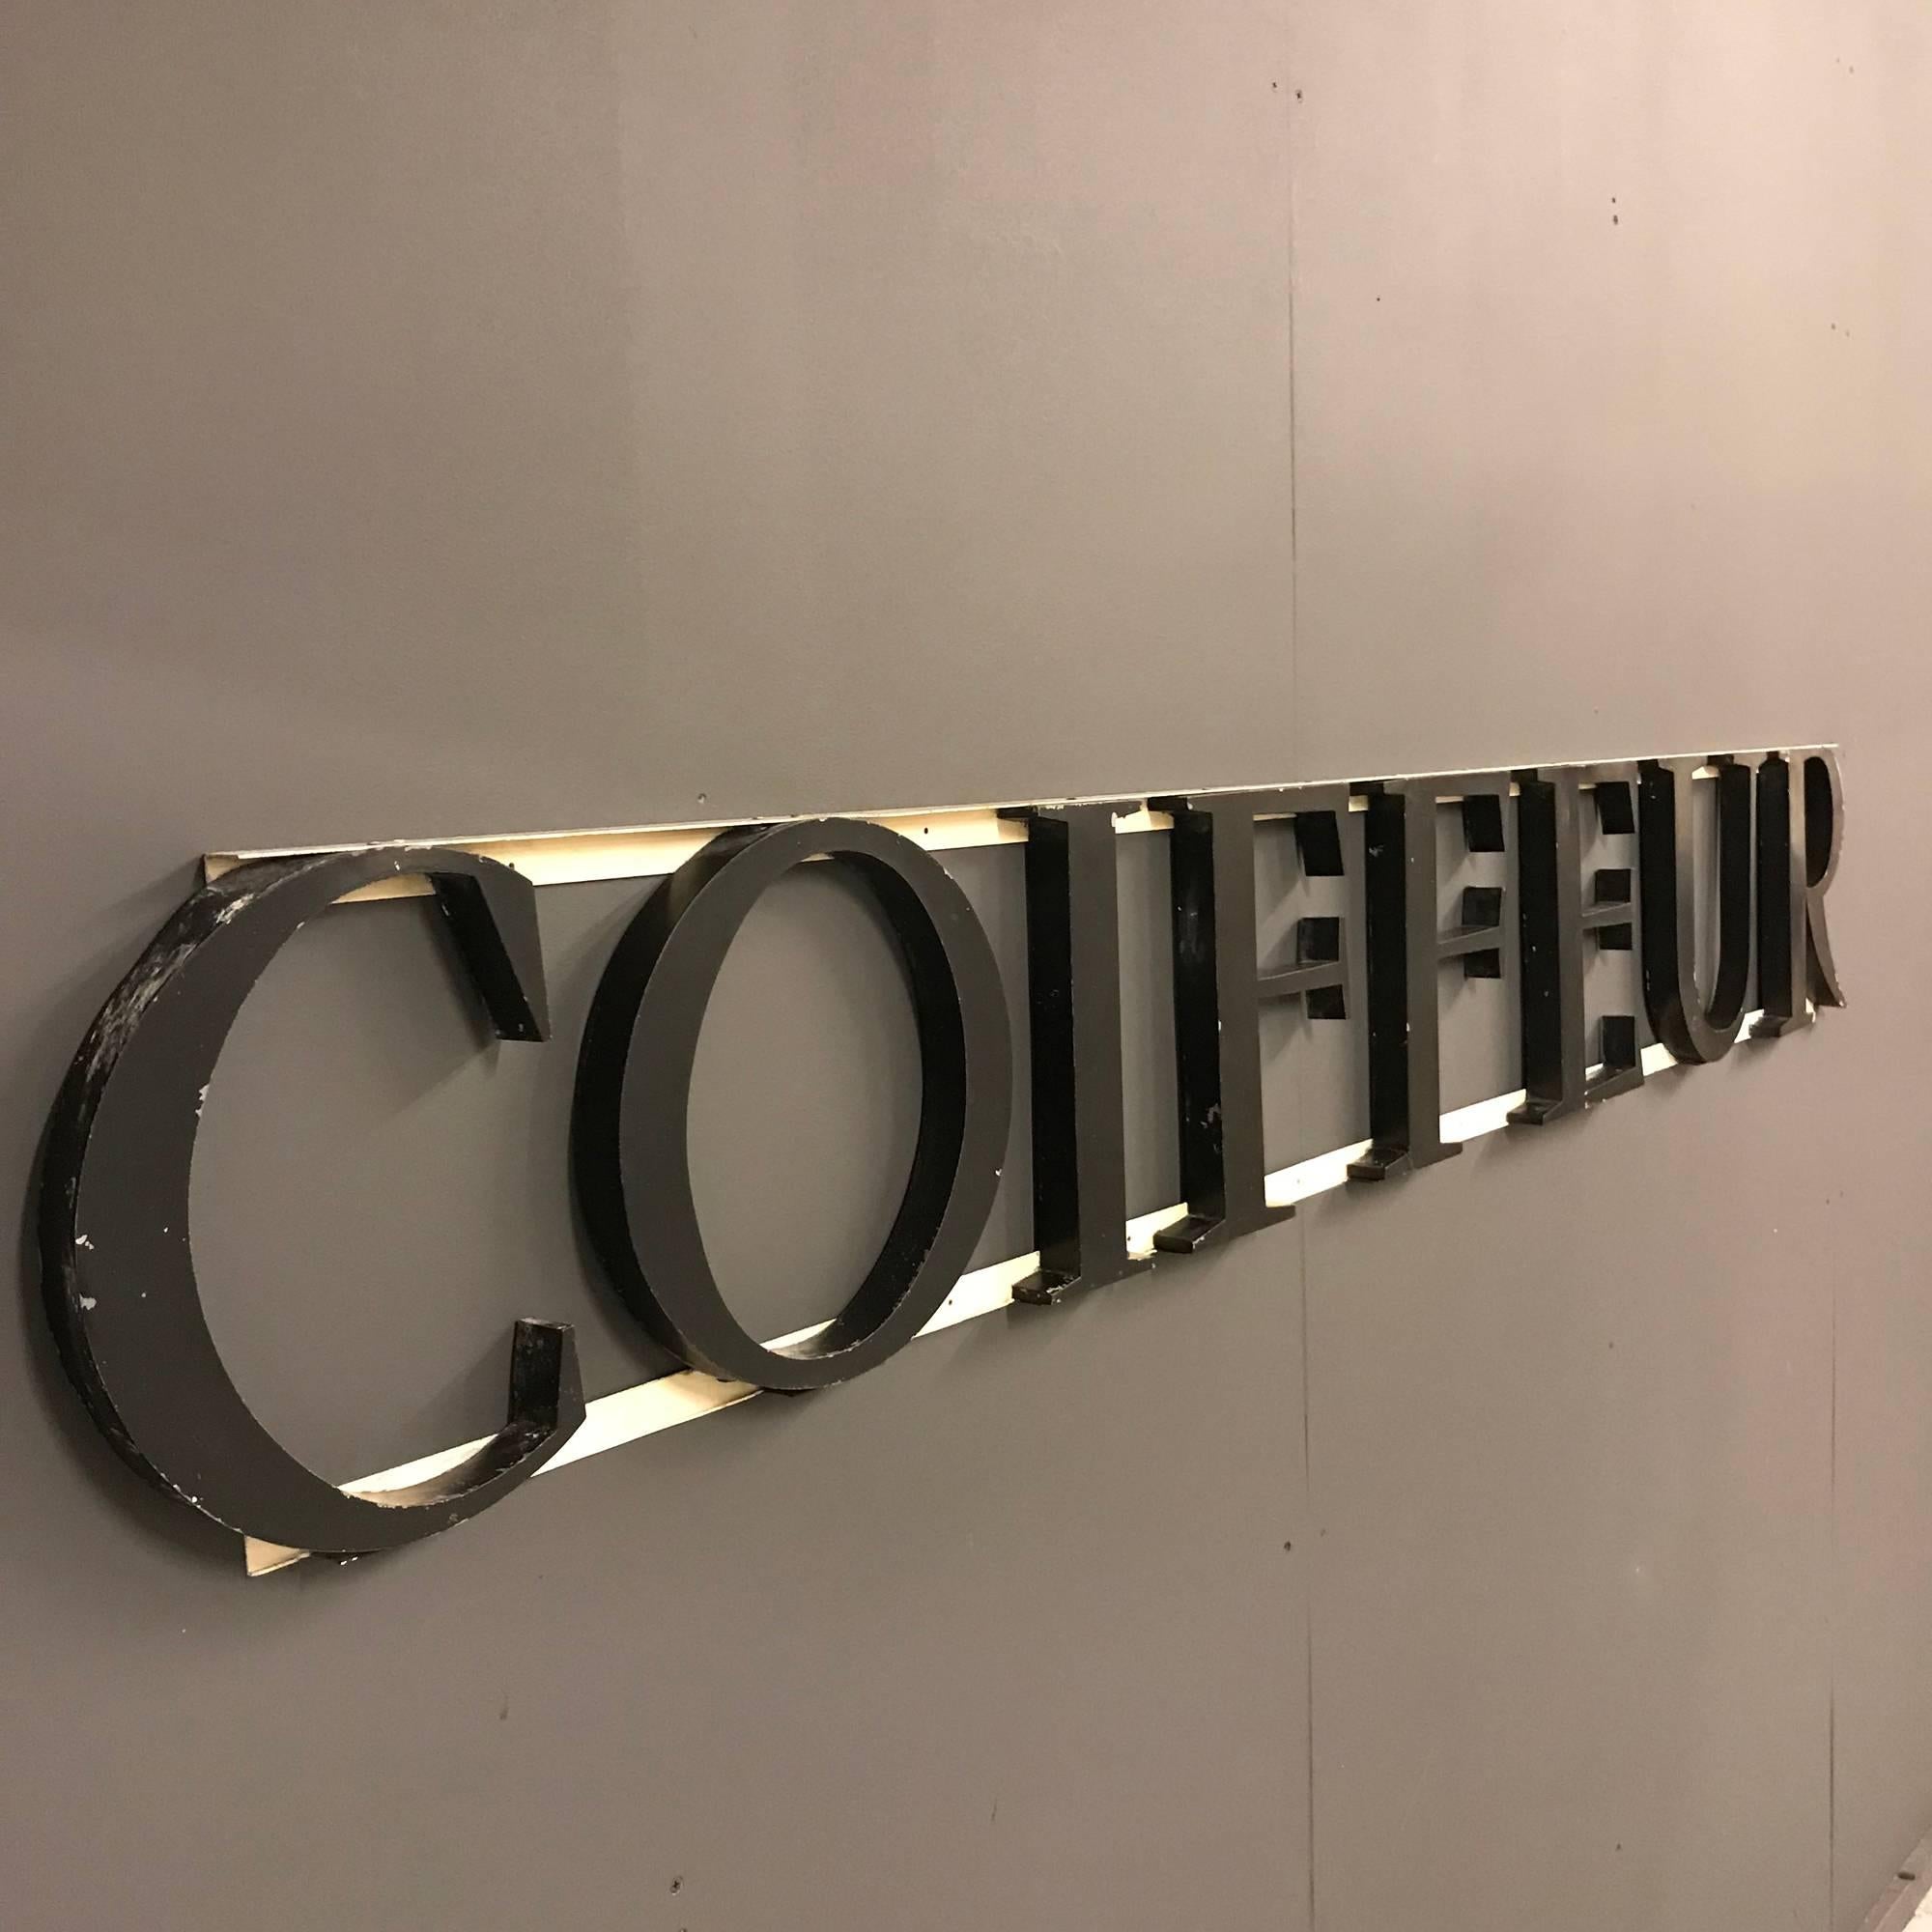 Vintage French hairdresser or barbershop sign. Letters are made of zinc and remain in Good condition. Coiffeur
Size of this French barbershop sign zinc coiffeur
Measures: 210 x 30 x 4 cm.